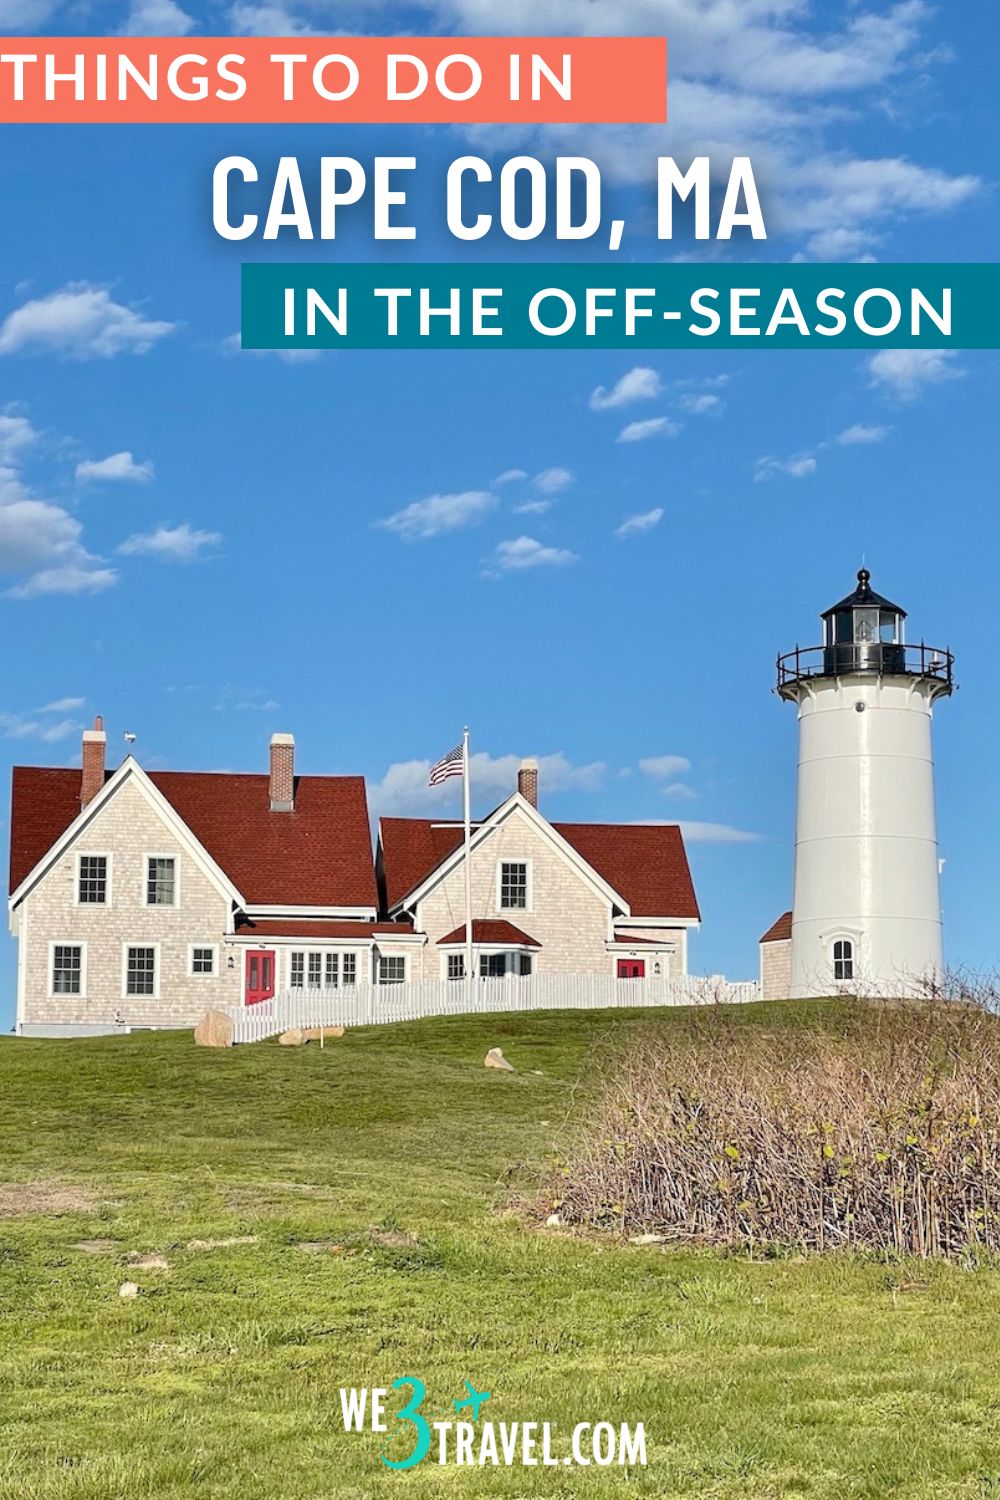 Things to do in Cape Cod, Massachusetts in the off season or shoulder season